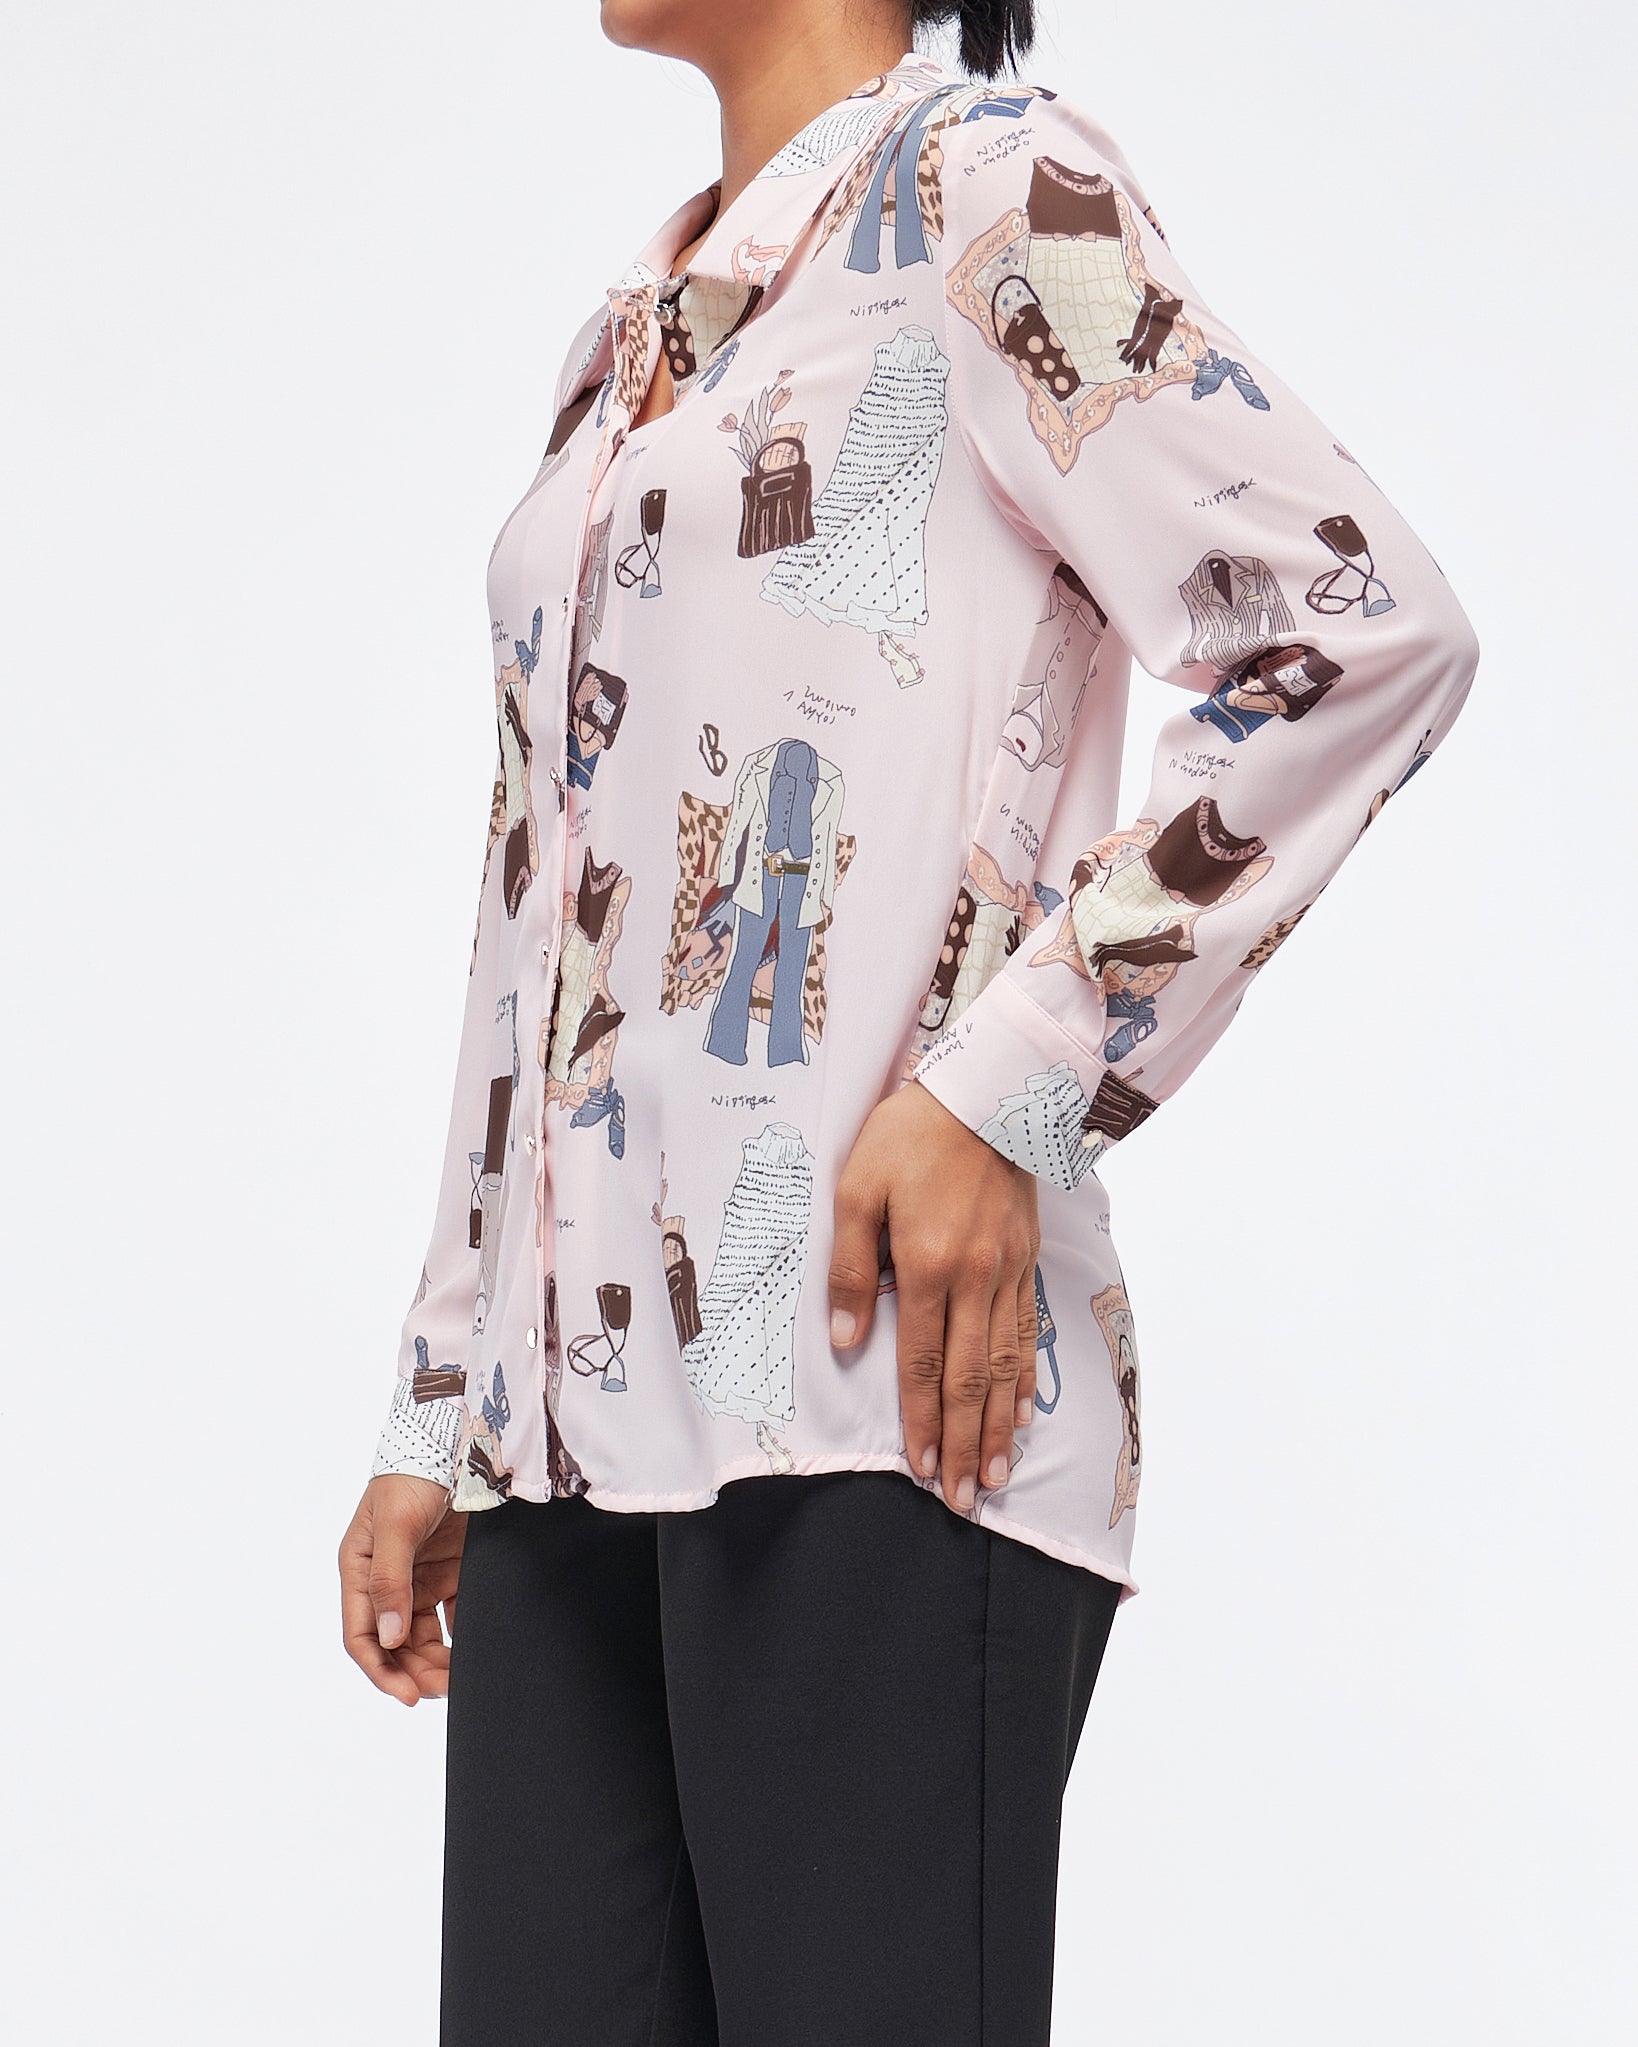 MOI OUTFIT-Cartoon Over Printed Lady Blouse 22.90